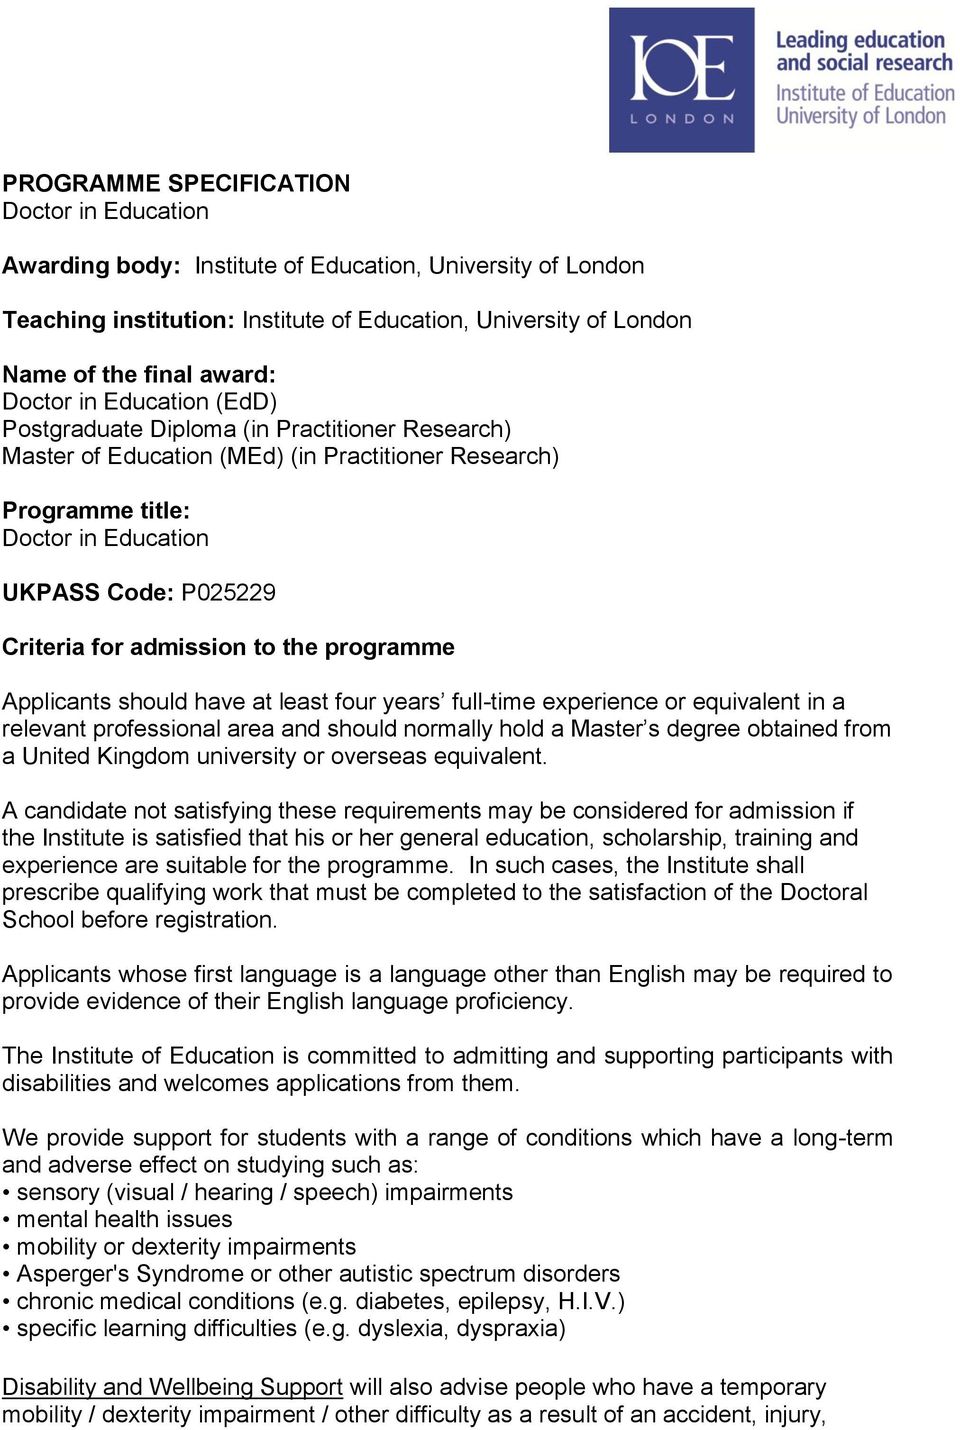 admission to the programme Applicants should have at least four years full-time experience or equivalent in a relevant professional area and should normally hold a Master s degree obtained from a